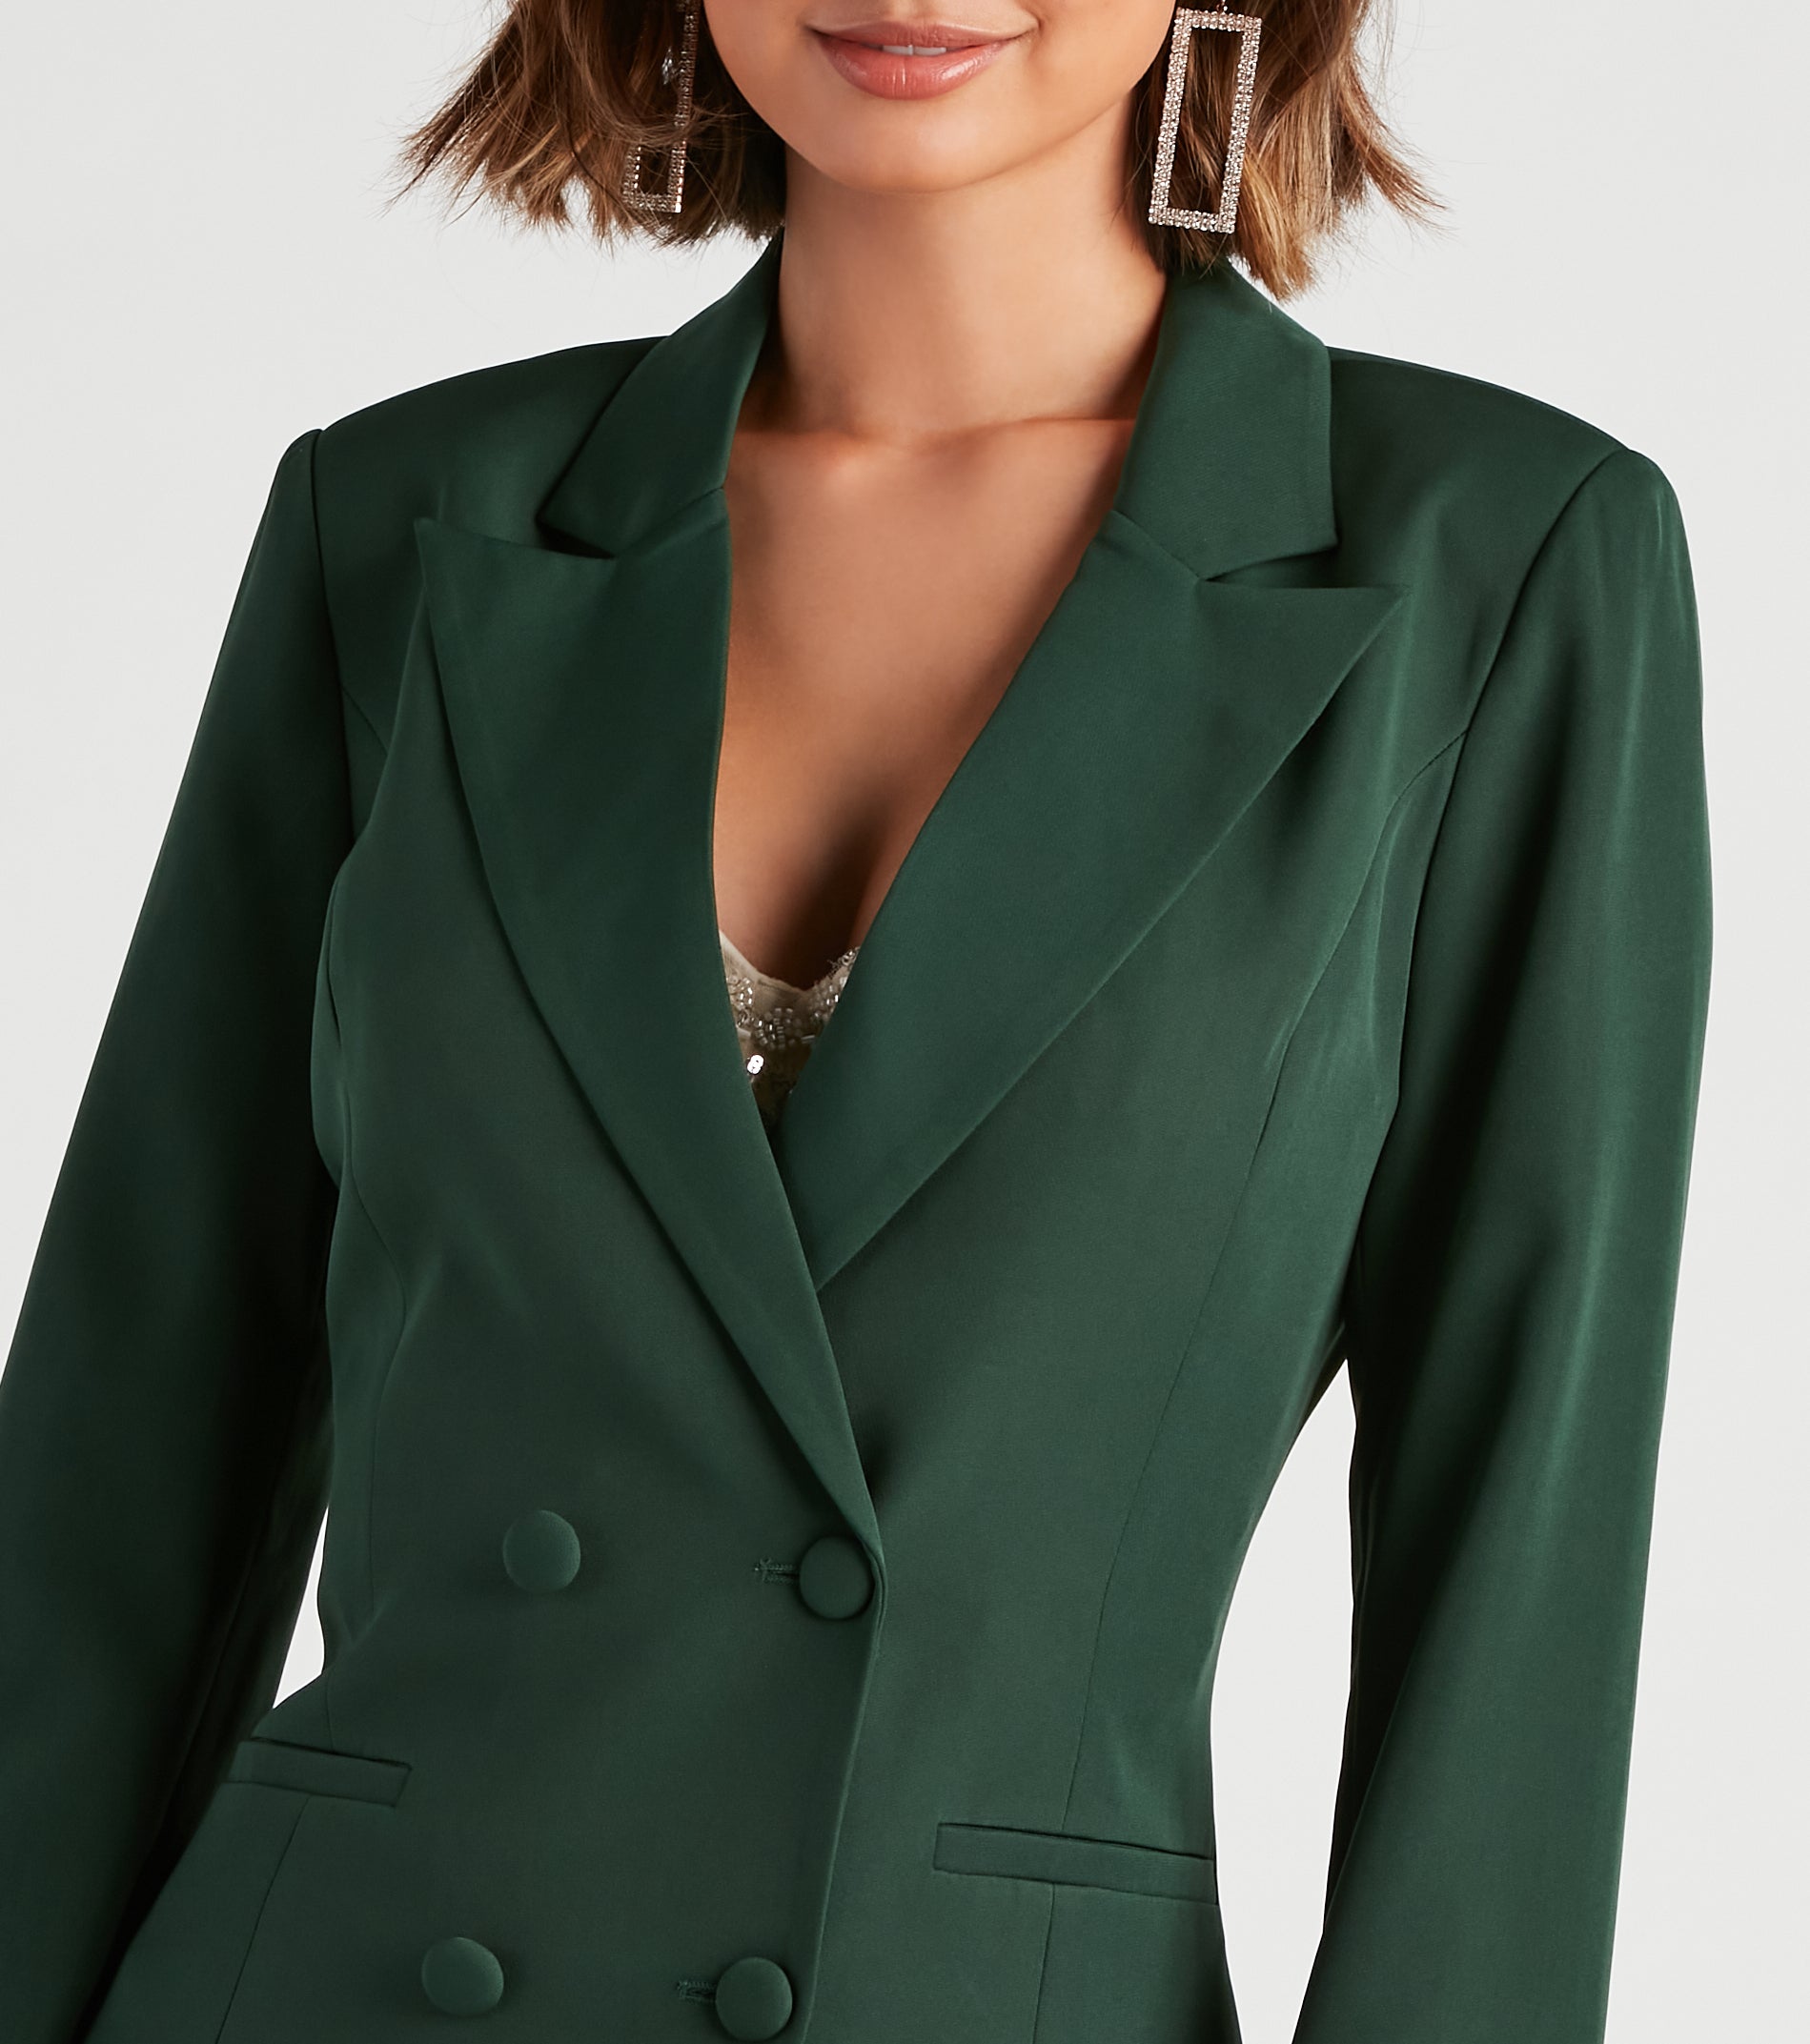 She Means Business Structured Blazer